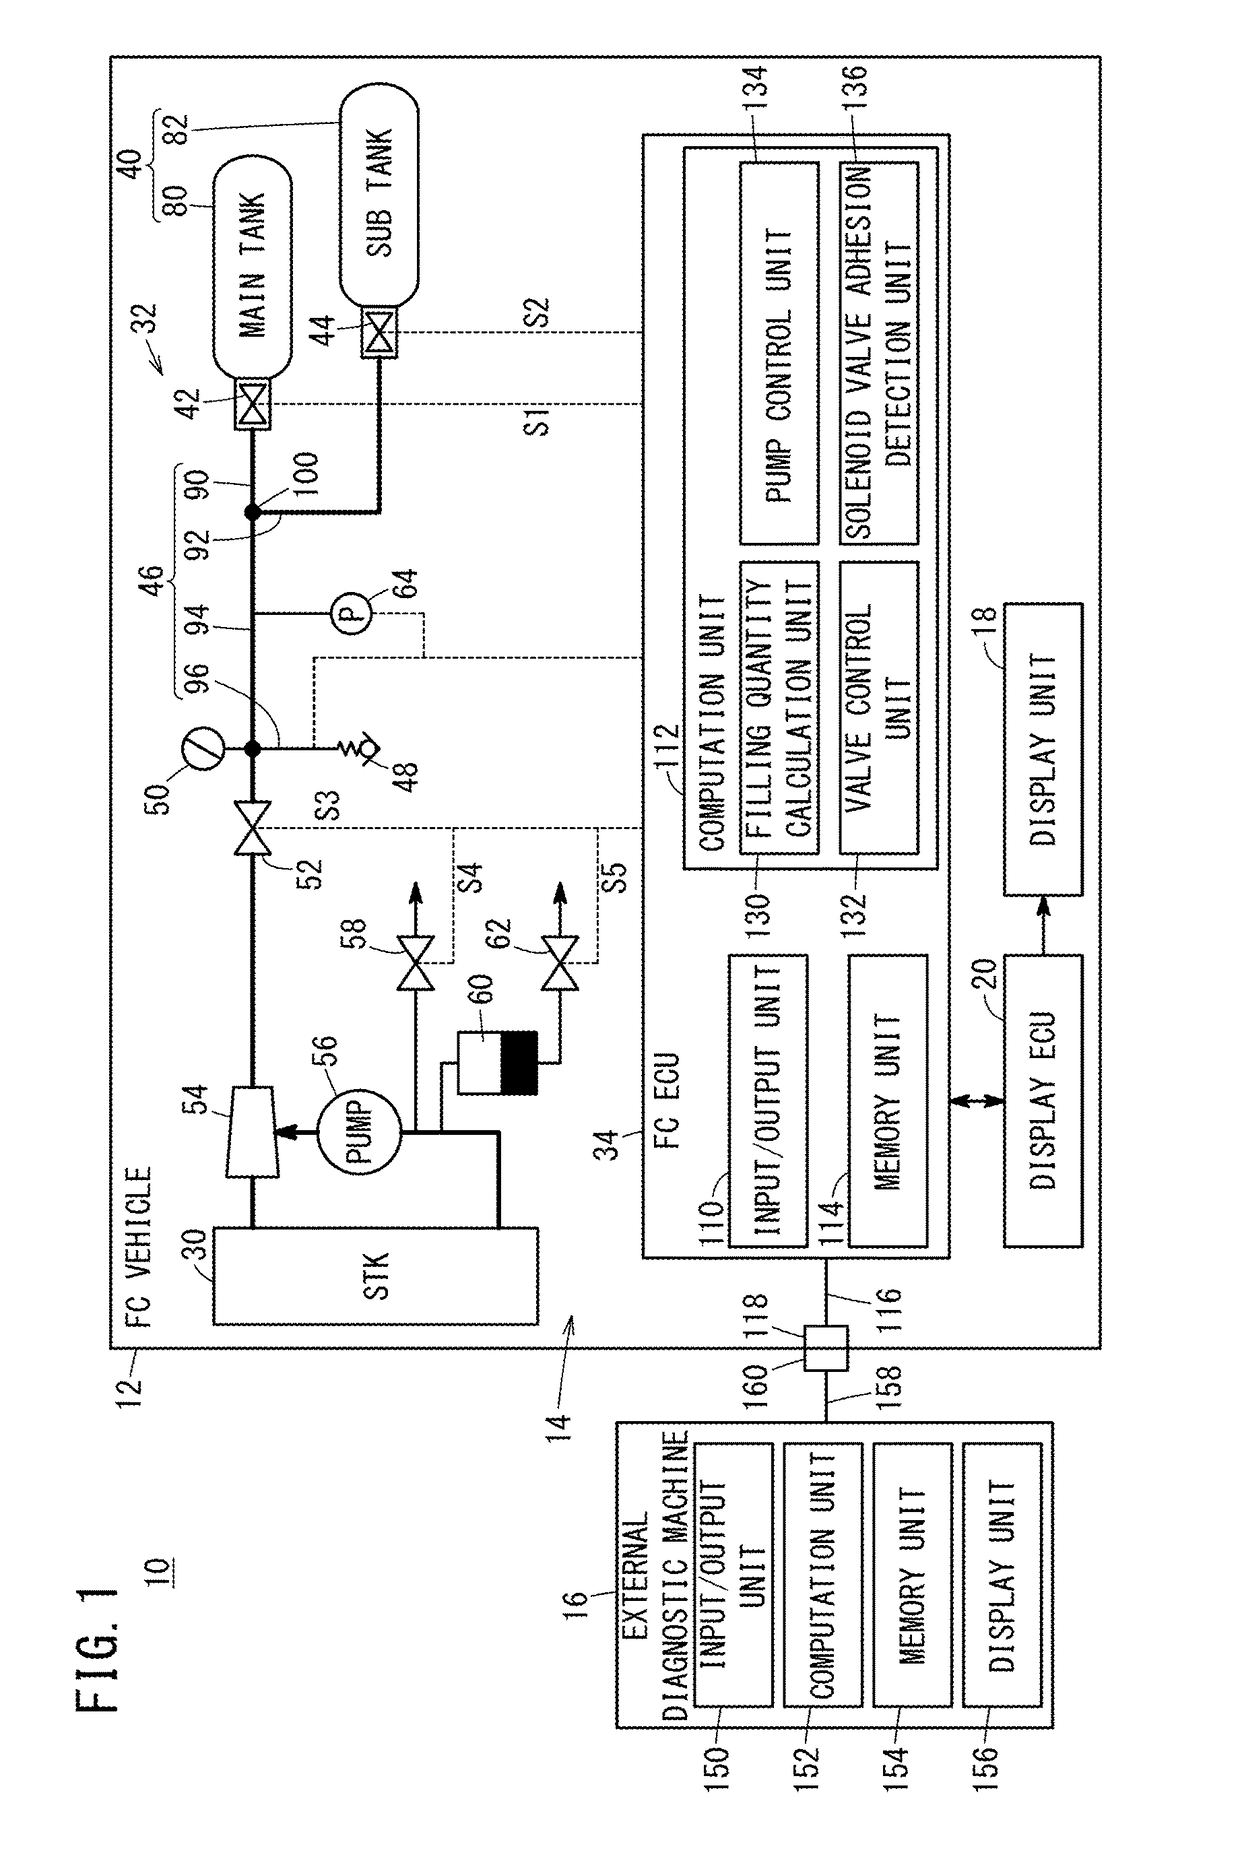 Method of inspecting a fuel cell system, and the fuel cell system